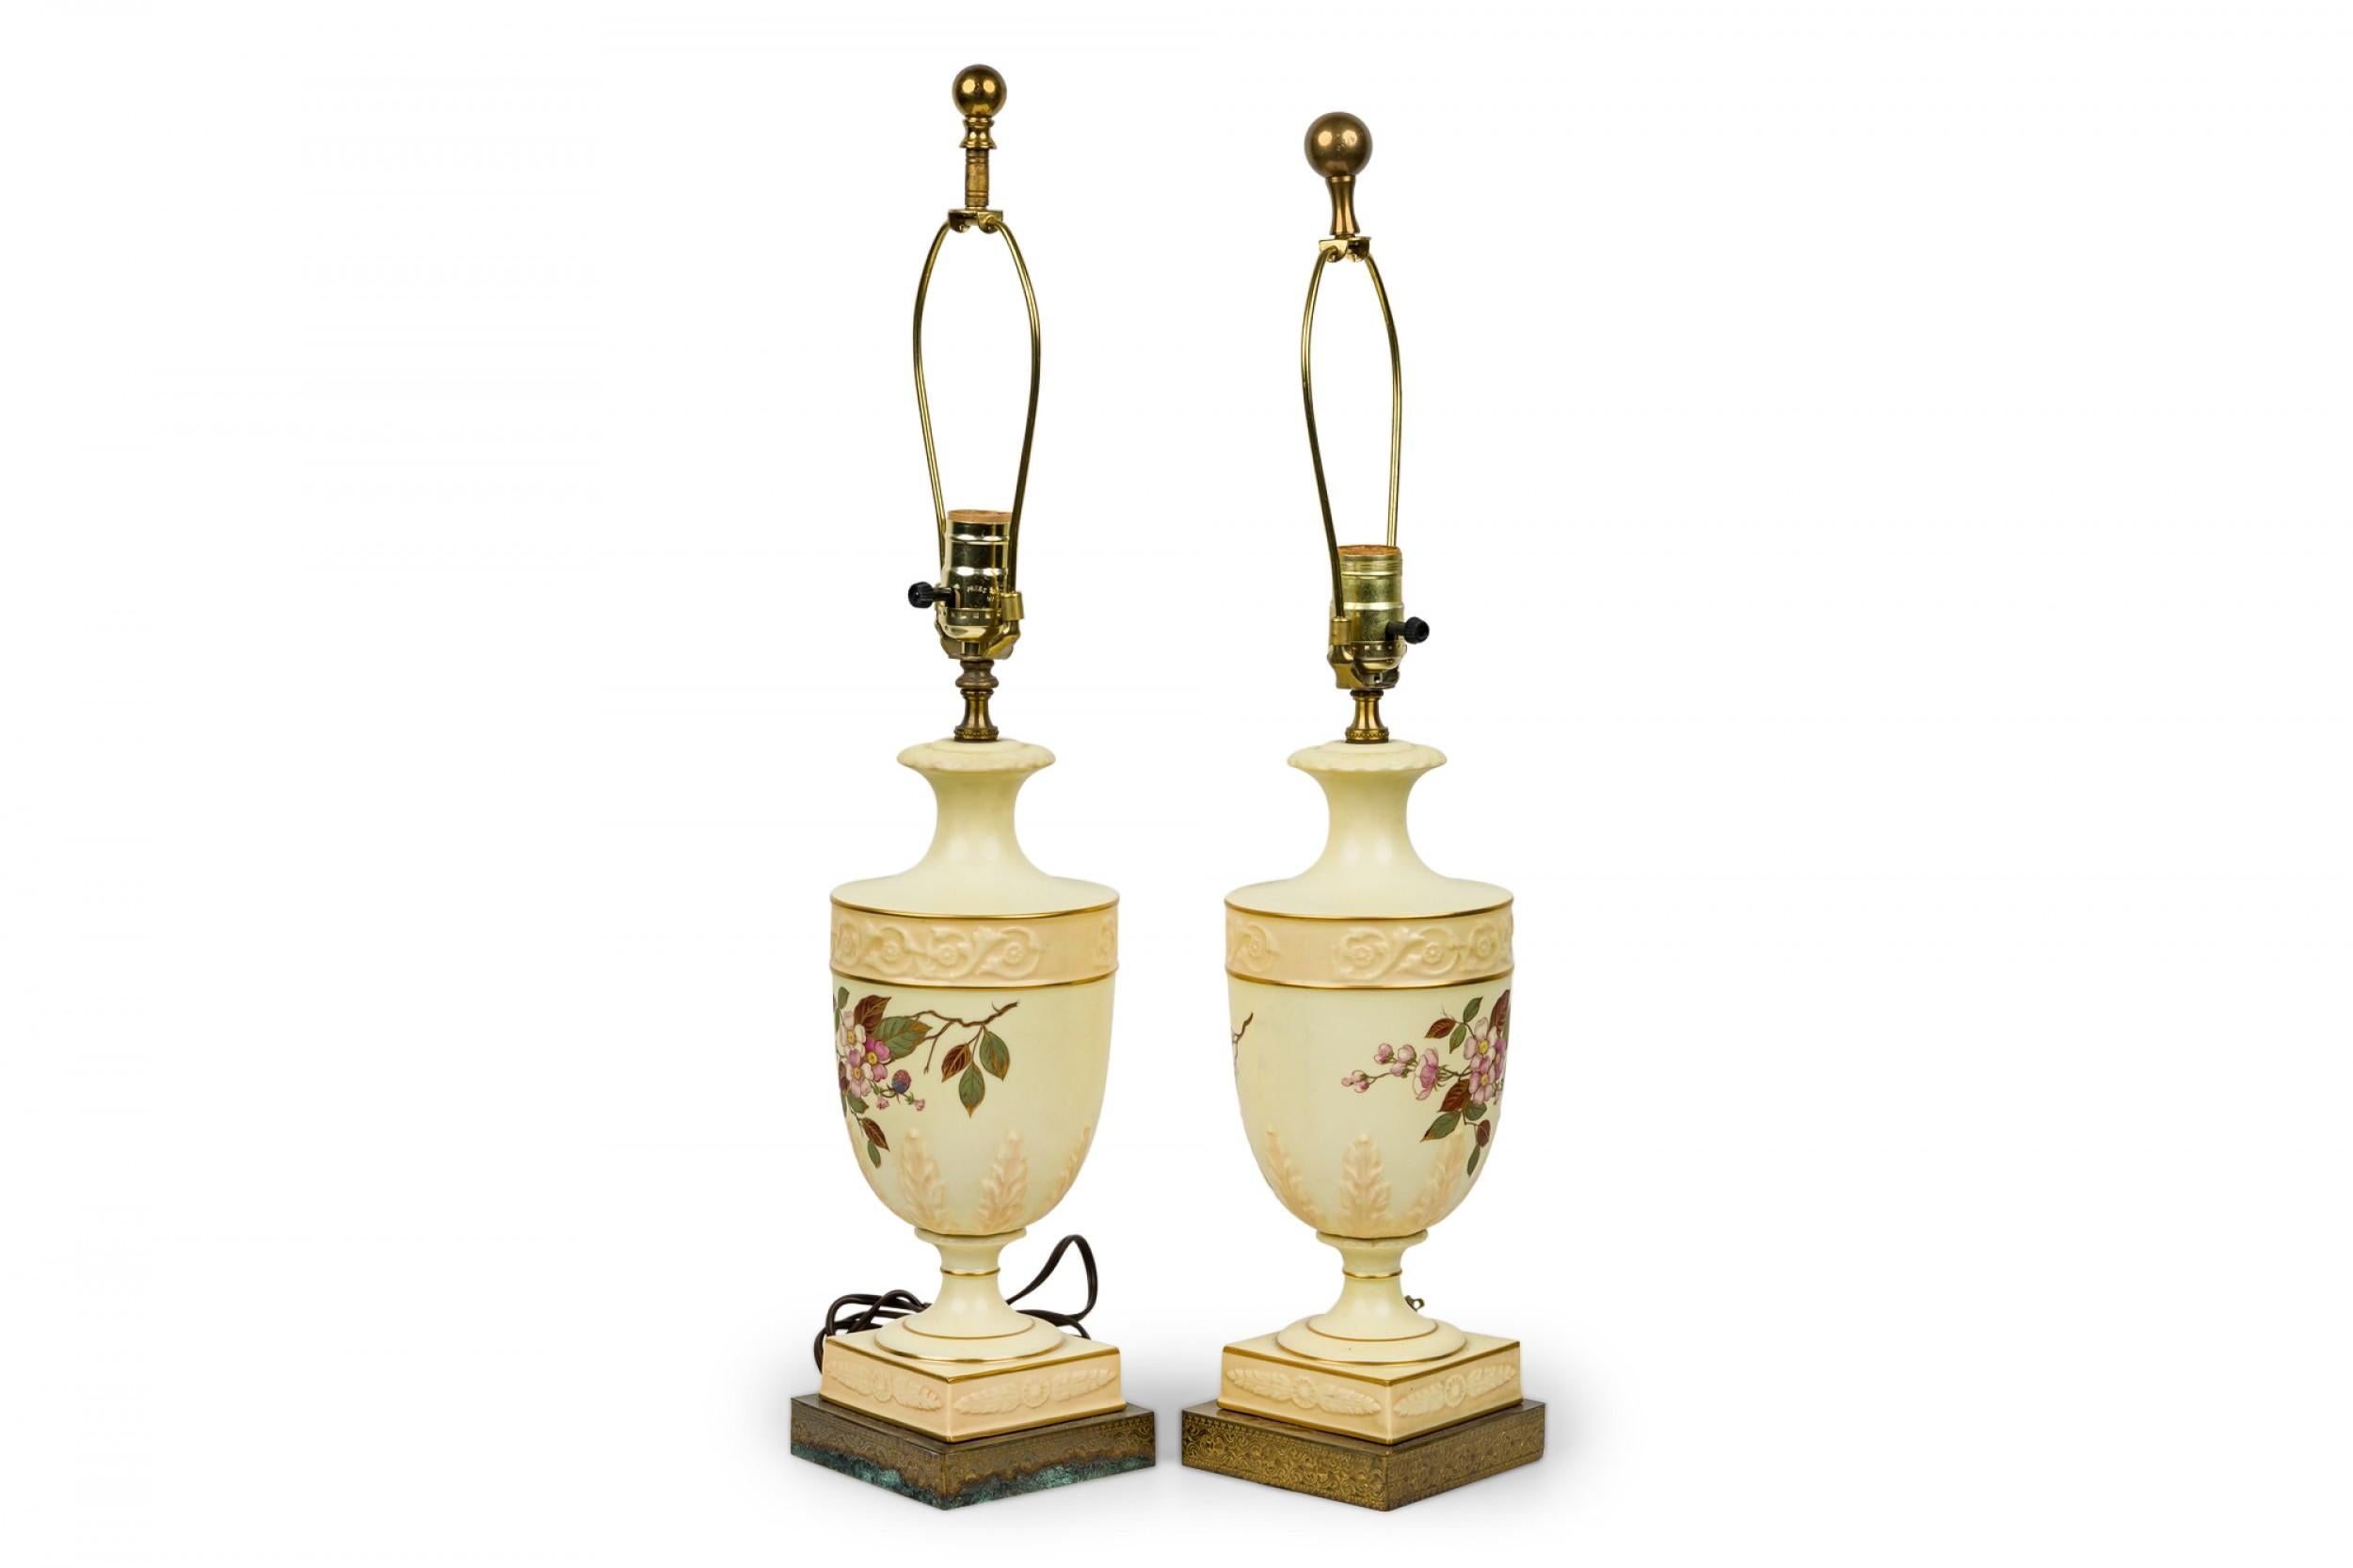 Pair of English Victorian style (late 20th century) table lamps with white ceramic urn-form bodies with painted floral designs, resting on a square base and mounted with brass hardware. (Priced as pair).